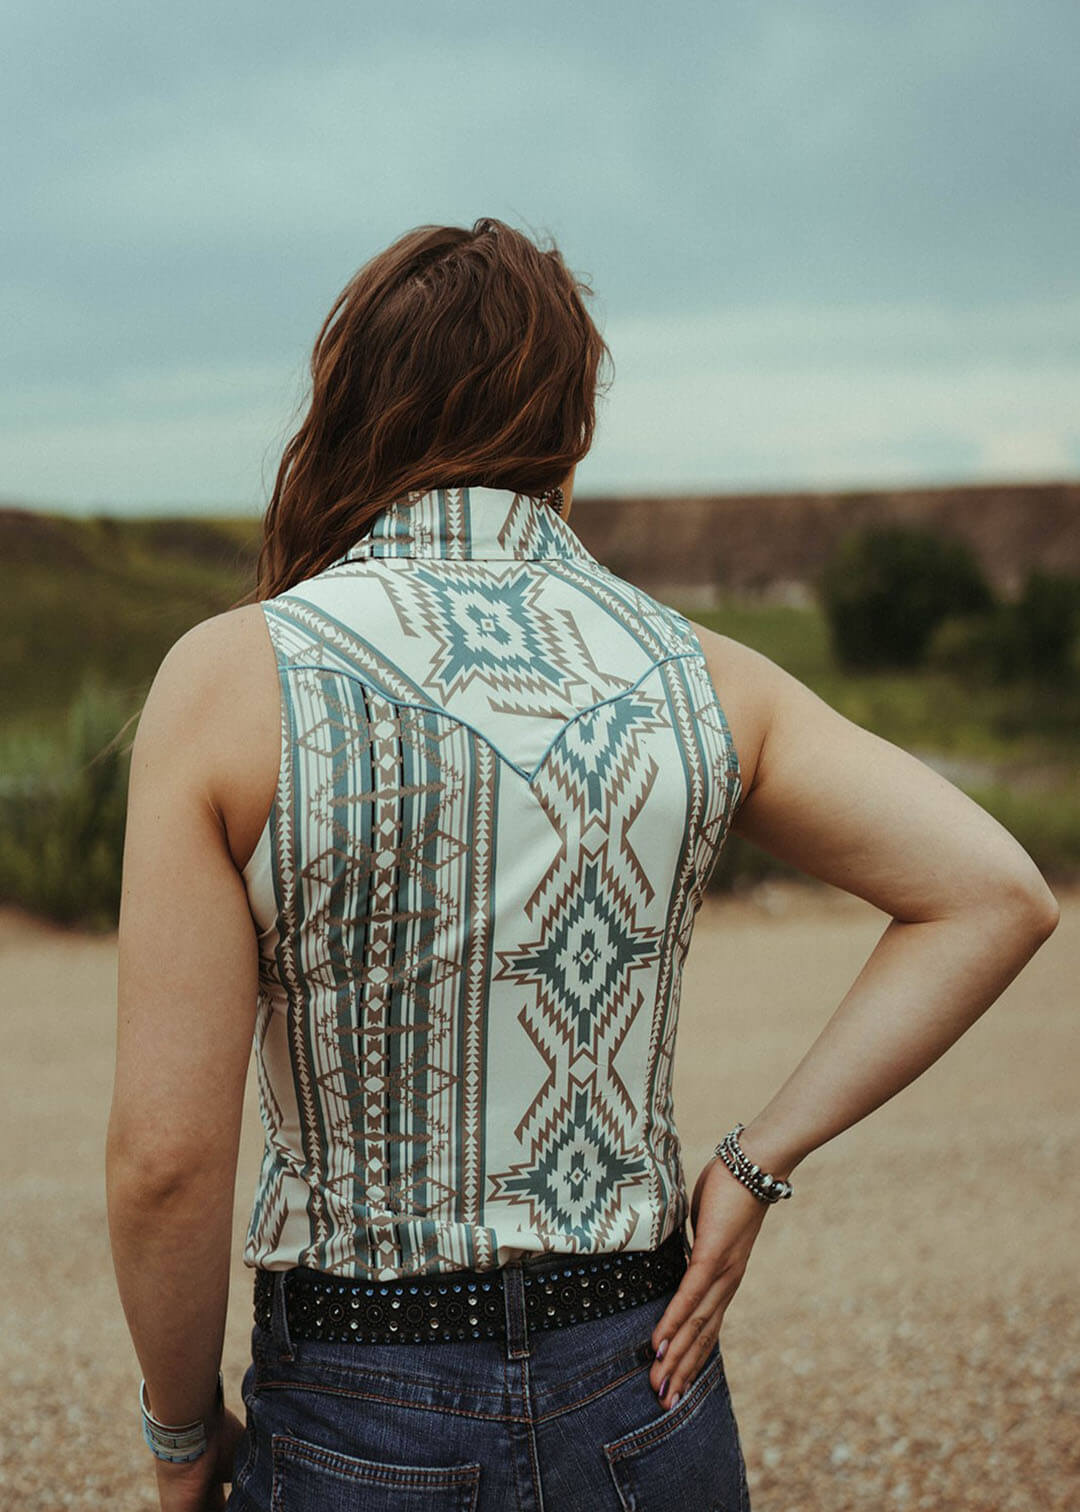 Woman modeilng the back of the Aztec Sleeveless Snap shirt.  The shirt is collared.  